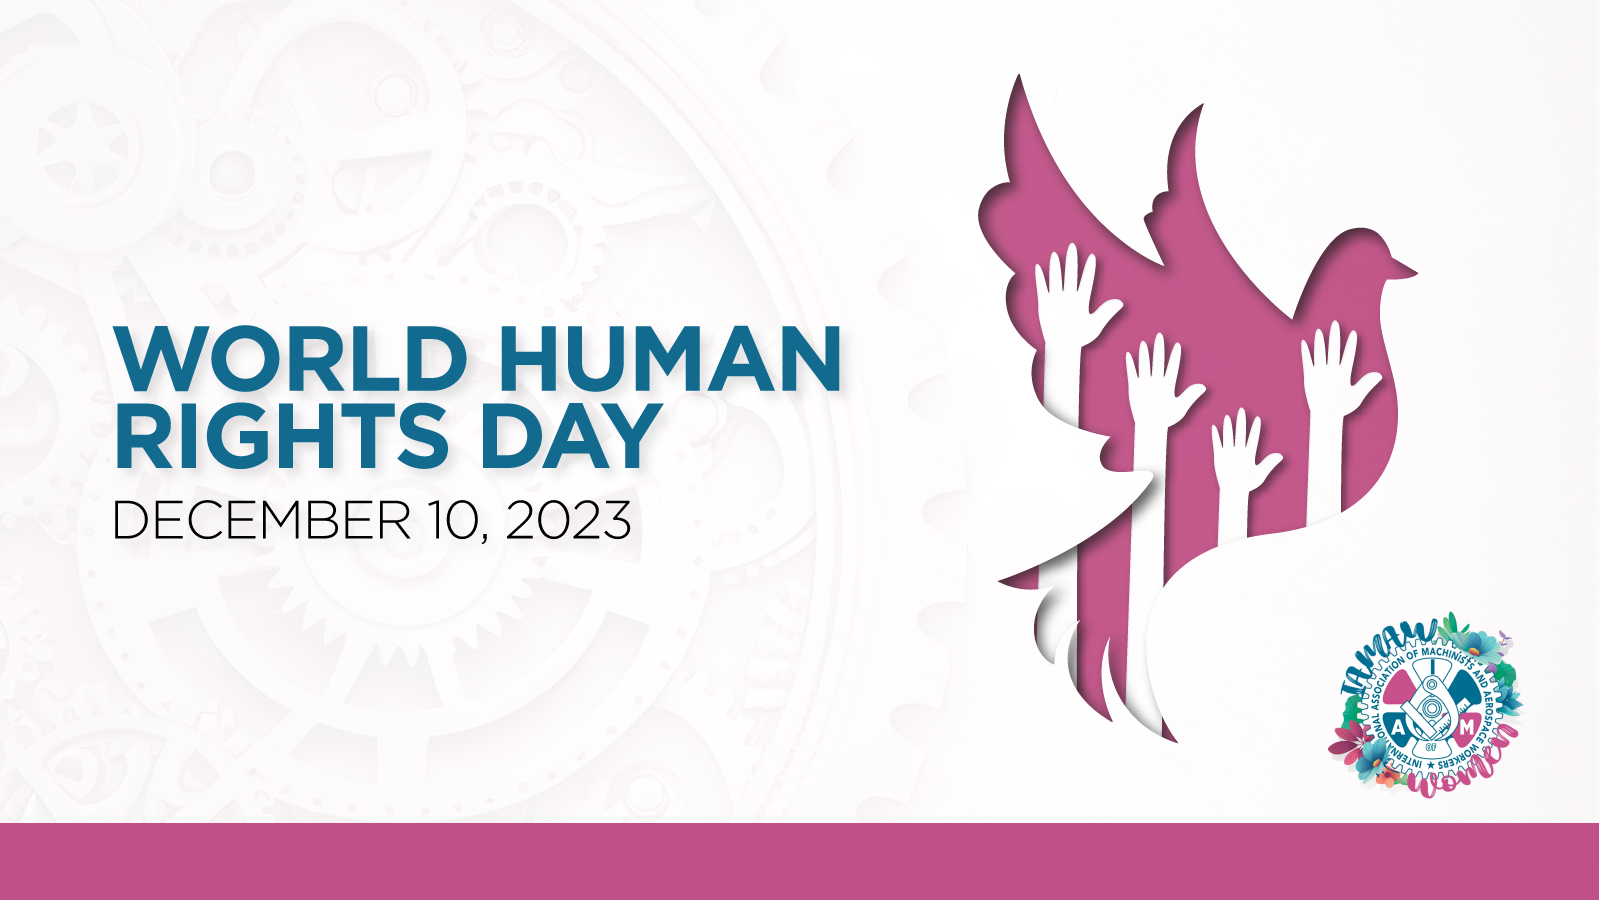 December 10th is National Human Rights Day